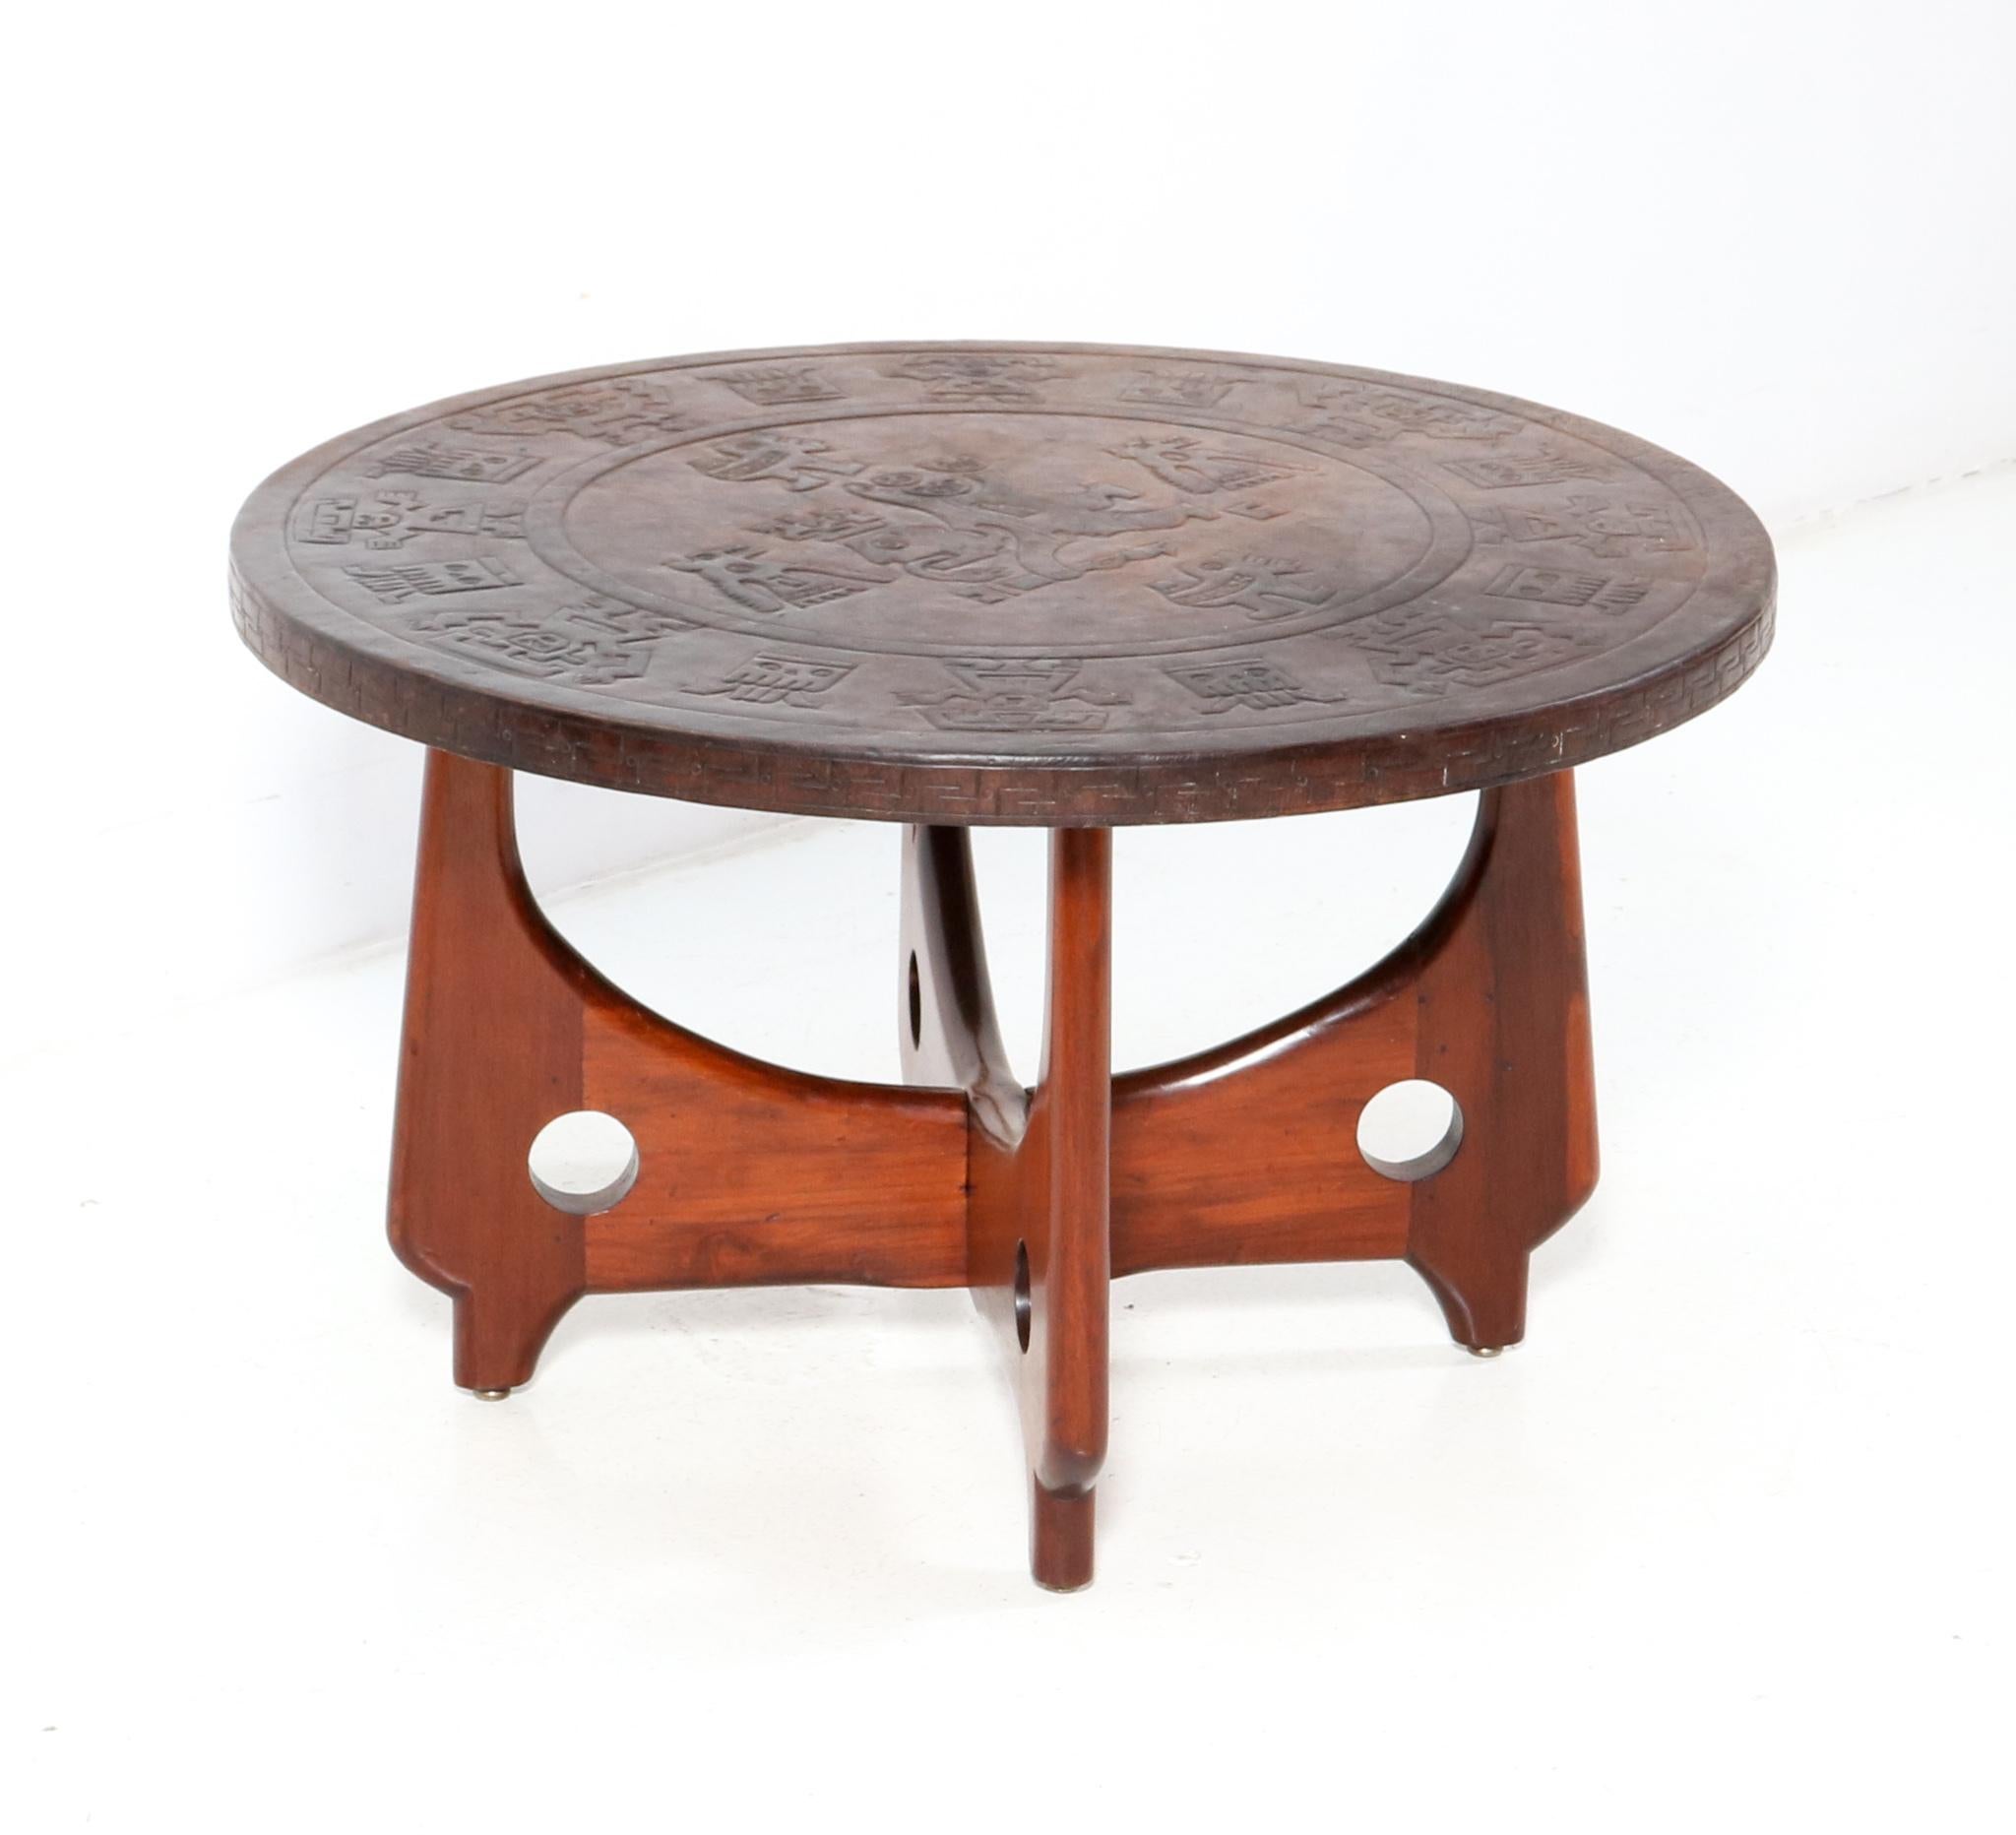 history of coffee tables